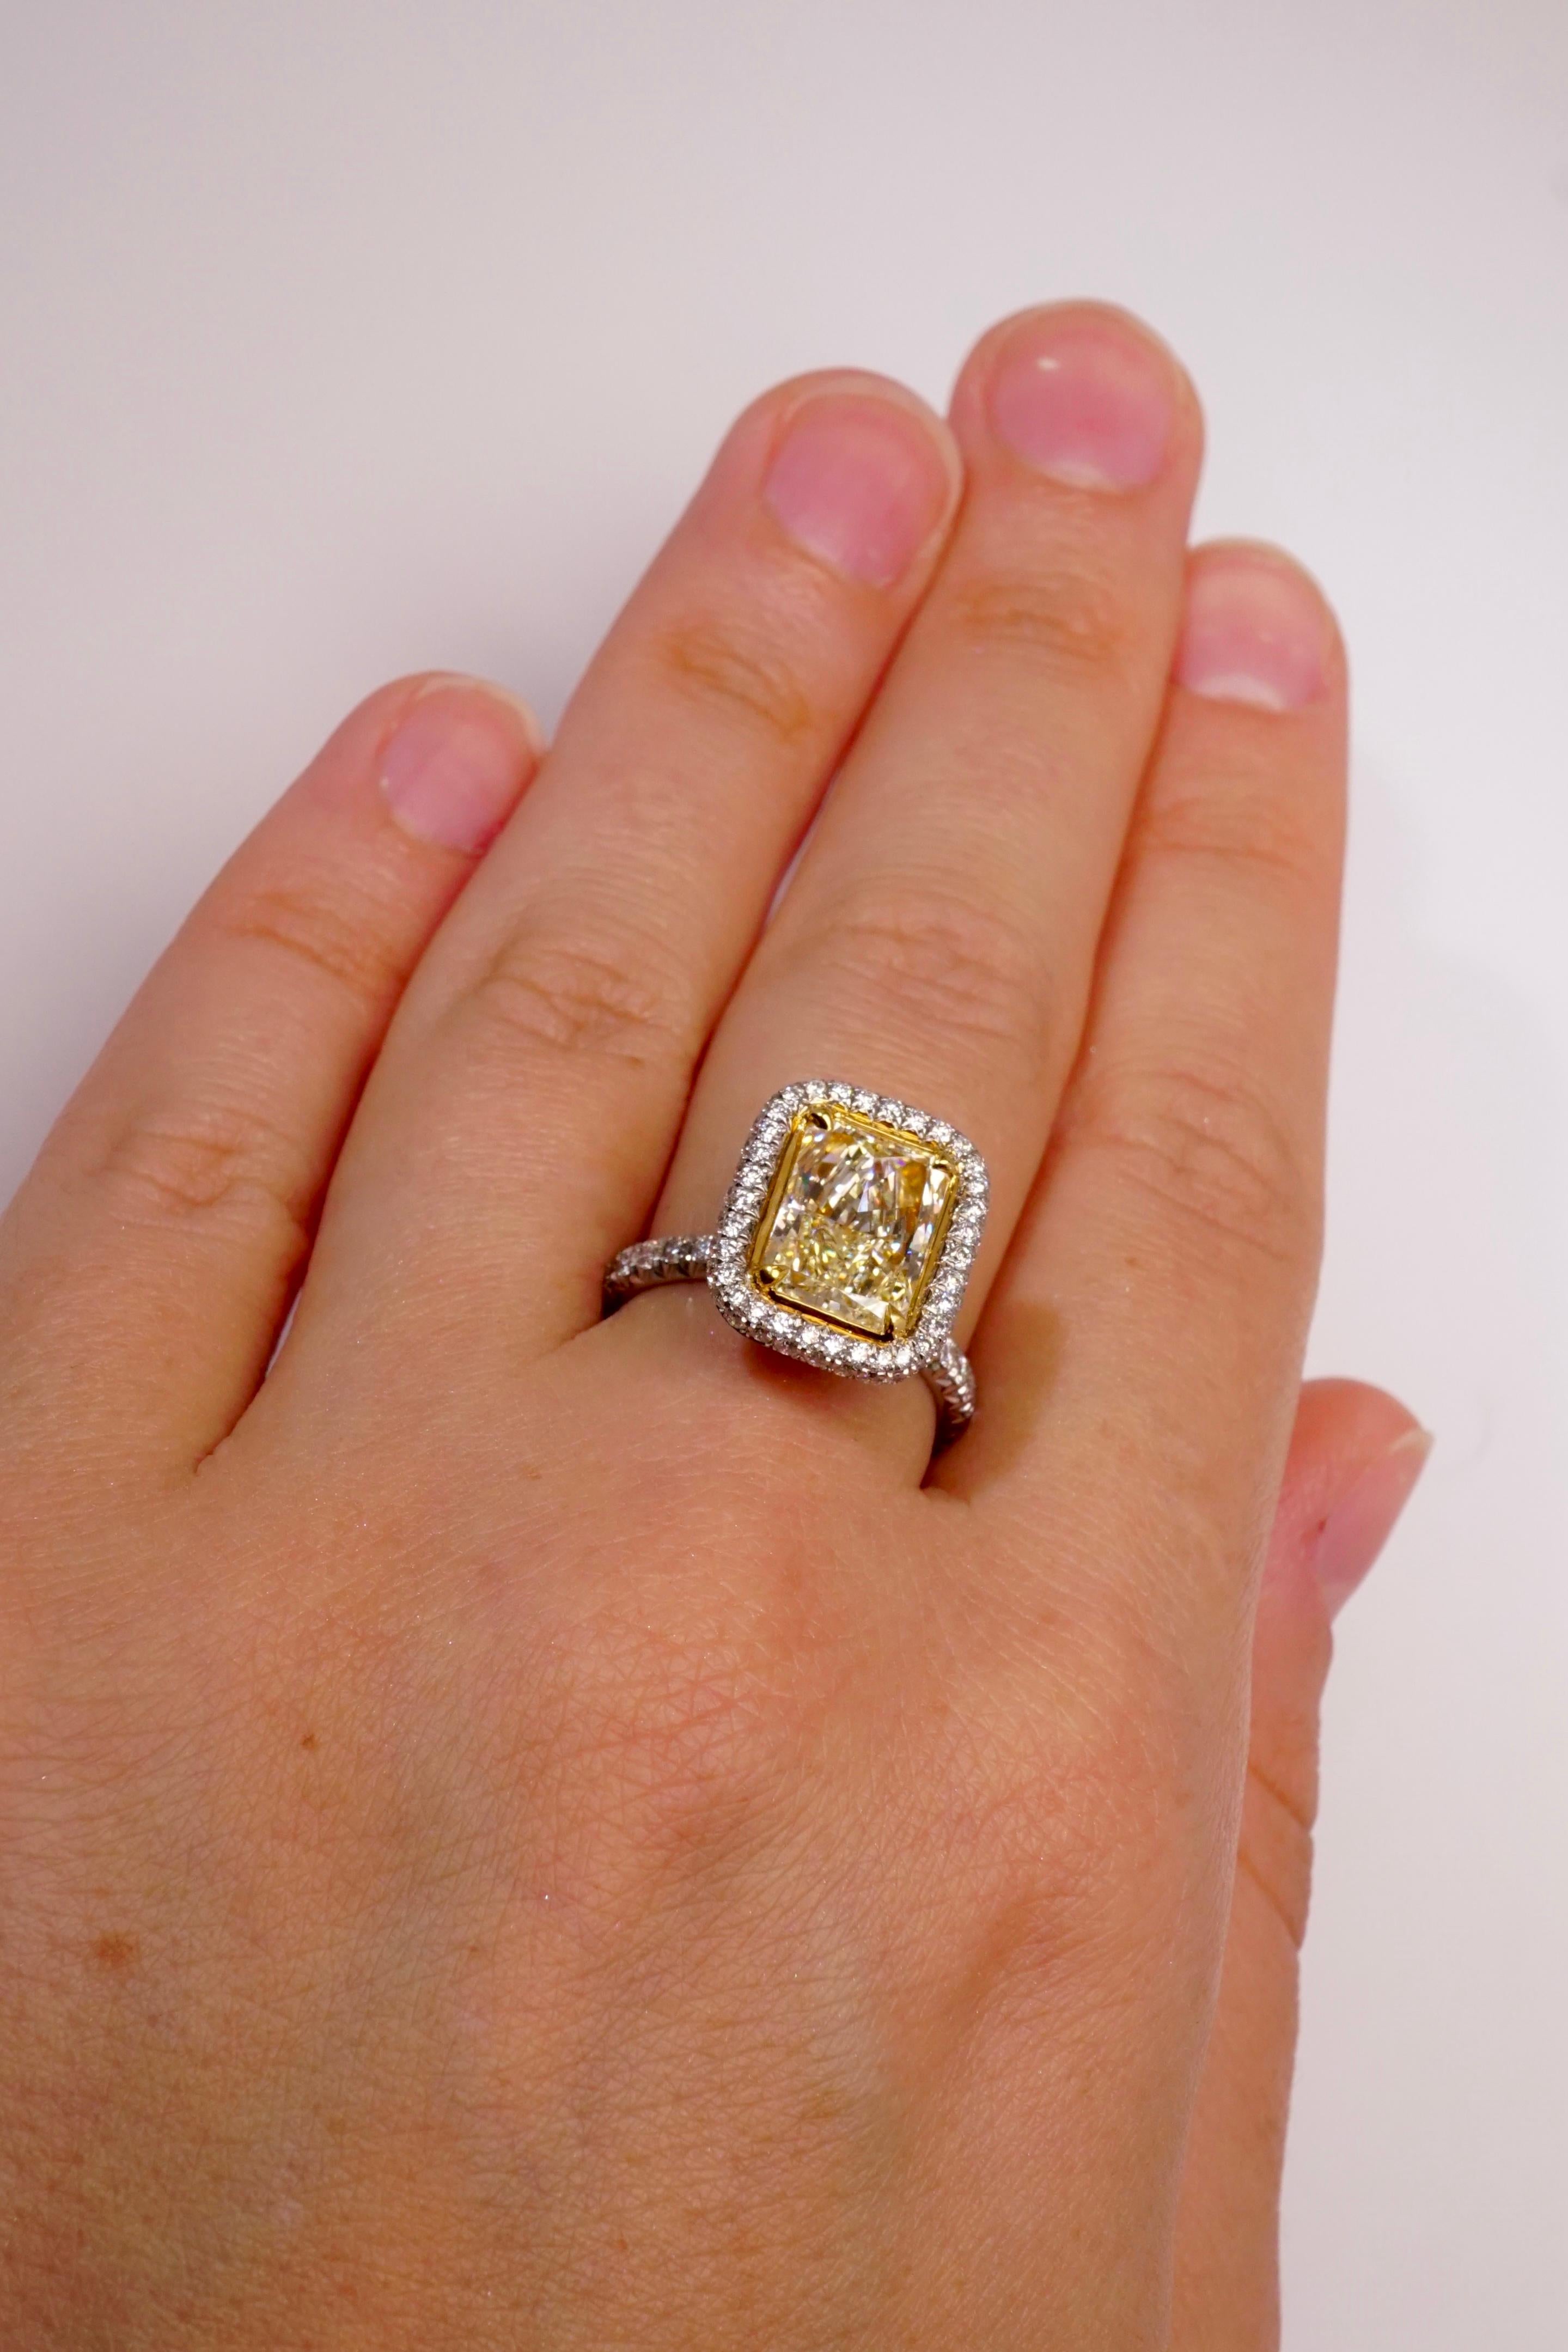 Radiant Cut Certified 2.67 Carat Fancy Light Yellow Radiant Diamond Engagement Ring For Sale